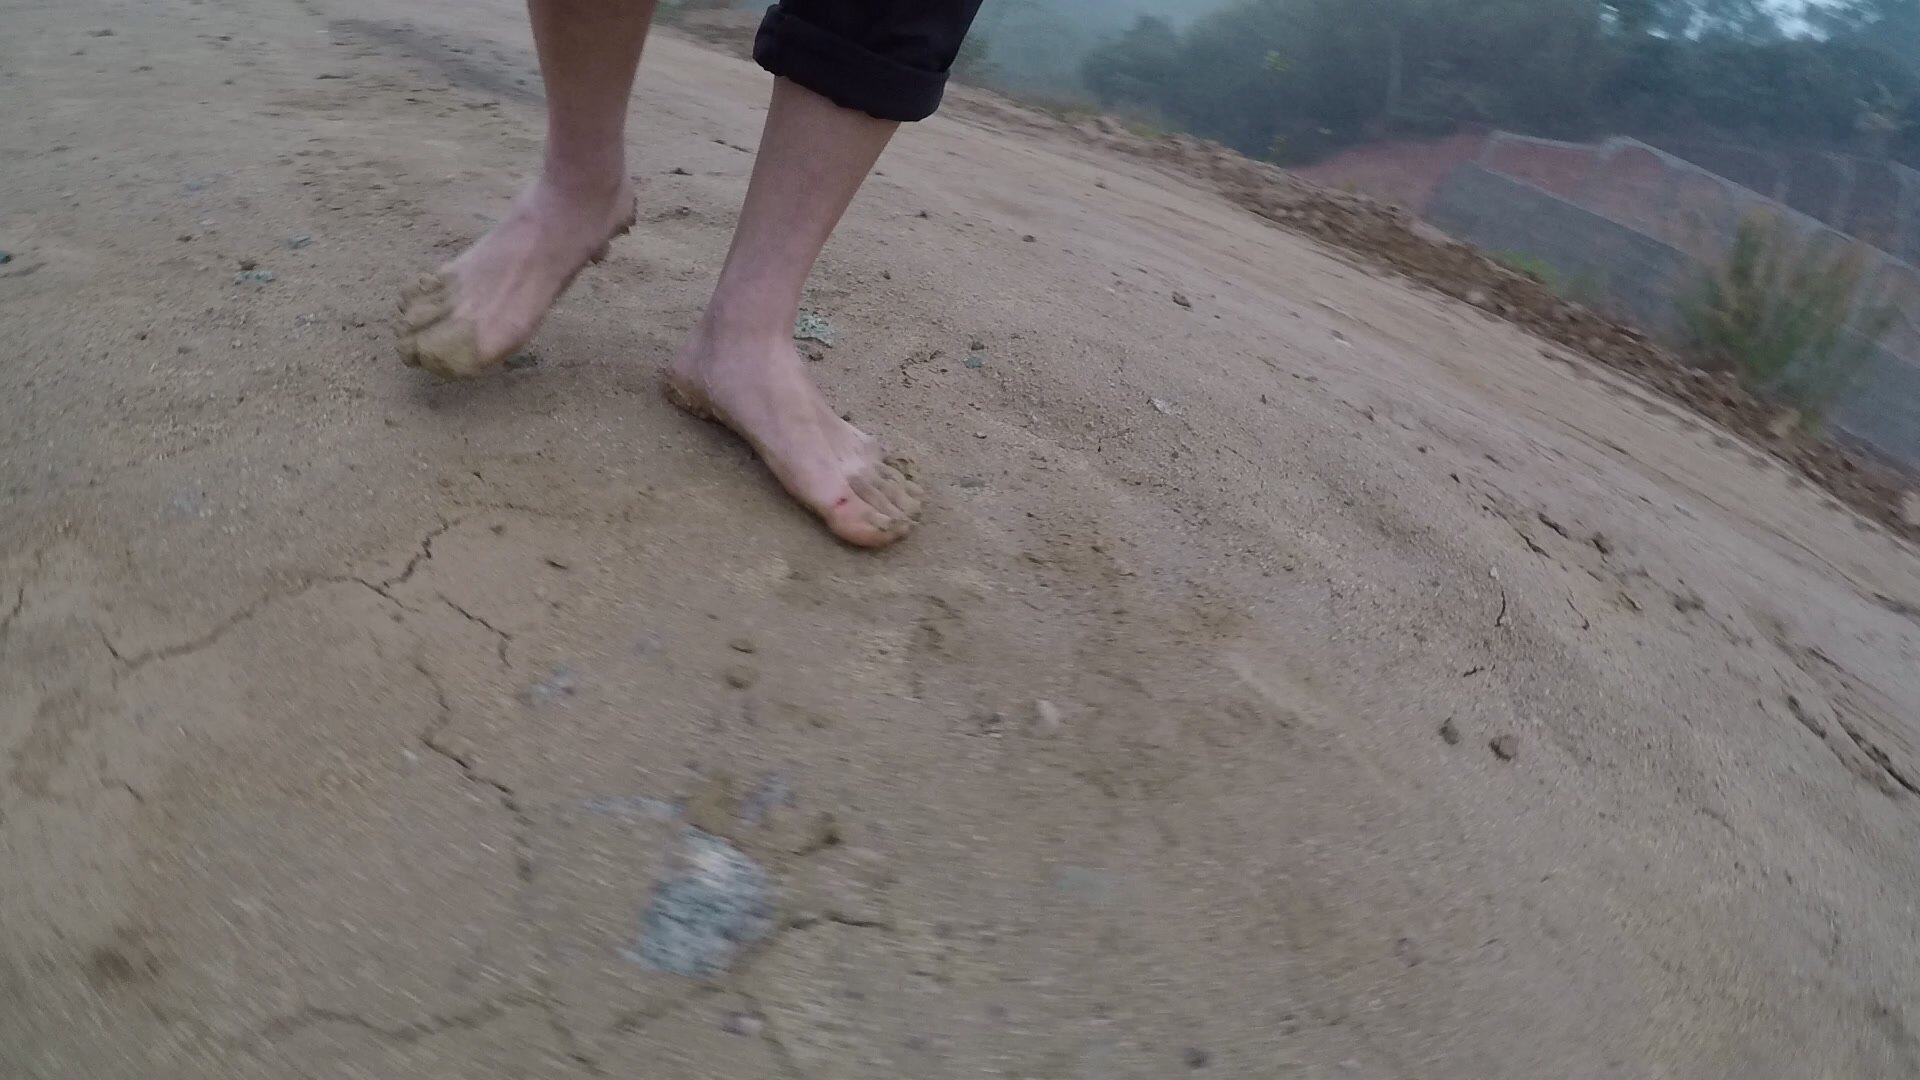 Walking barefoot in the mud